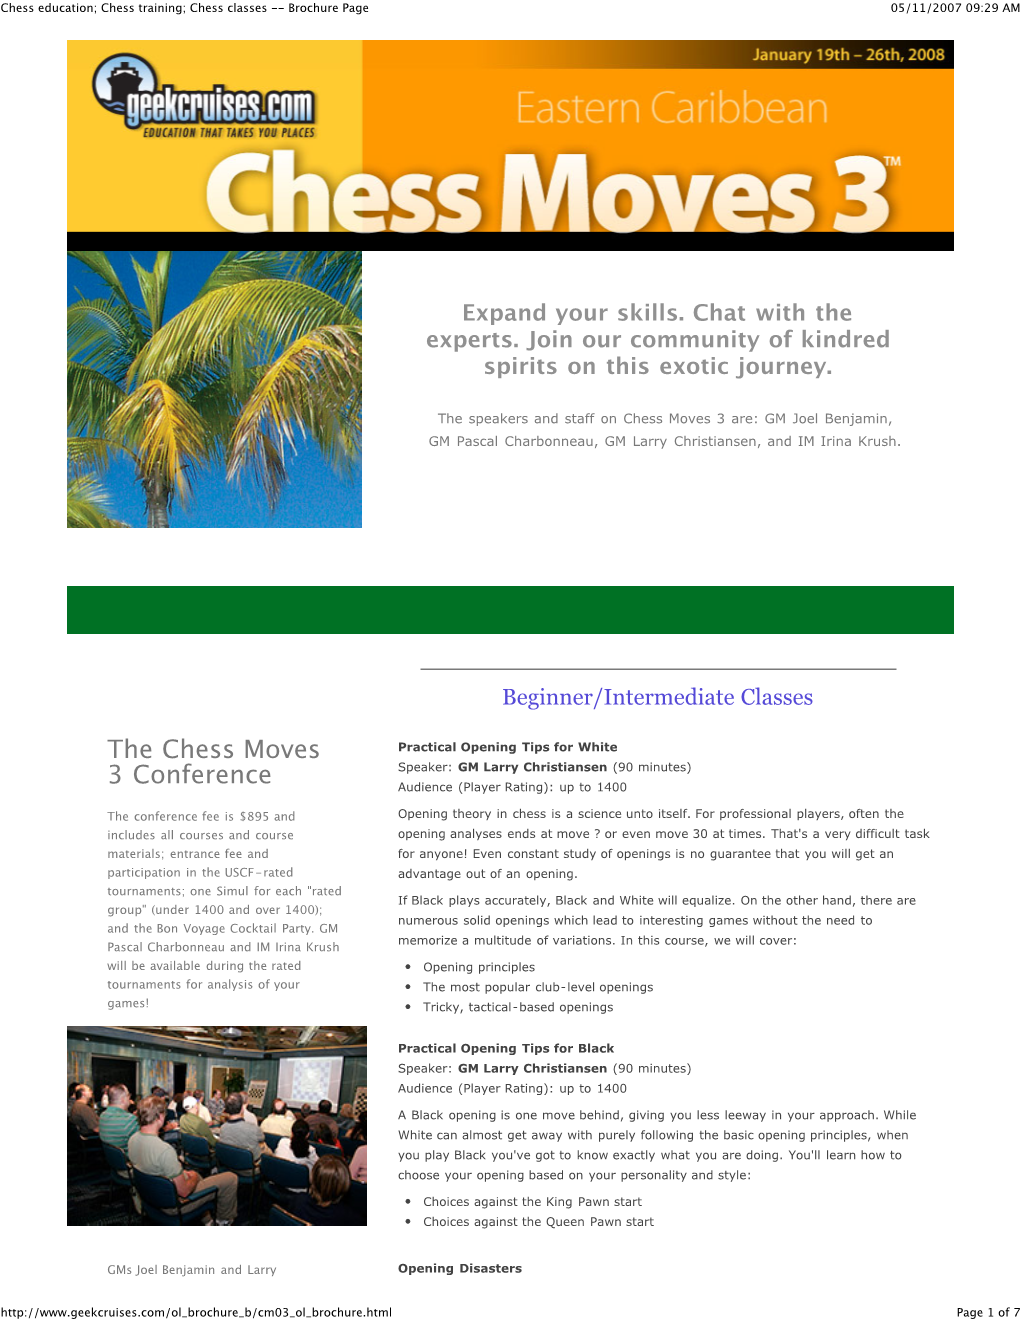 Chess Classes -- Brochure Page 05/11/2007 09:29 AM